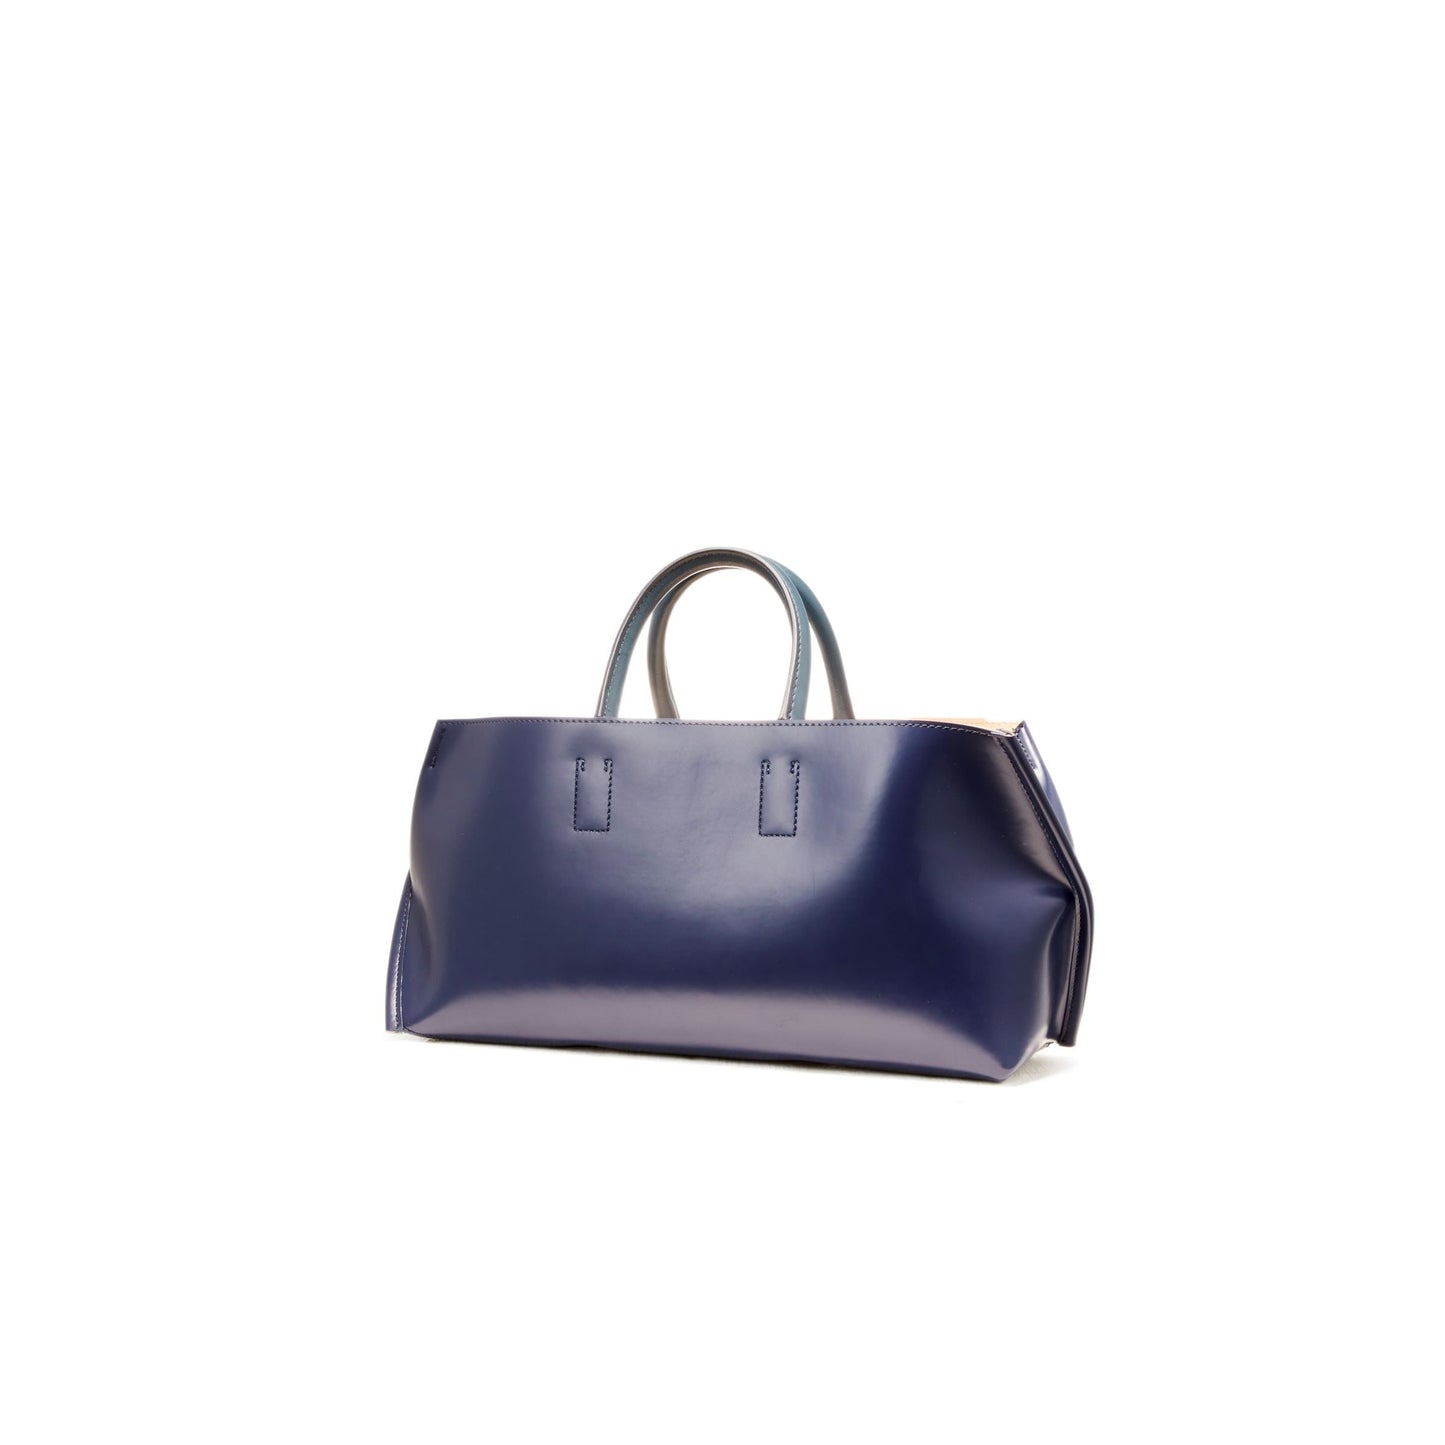 SLOPE WIDE TOTE S PVC/PIG.L/COW.L - NAVY/IVORY